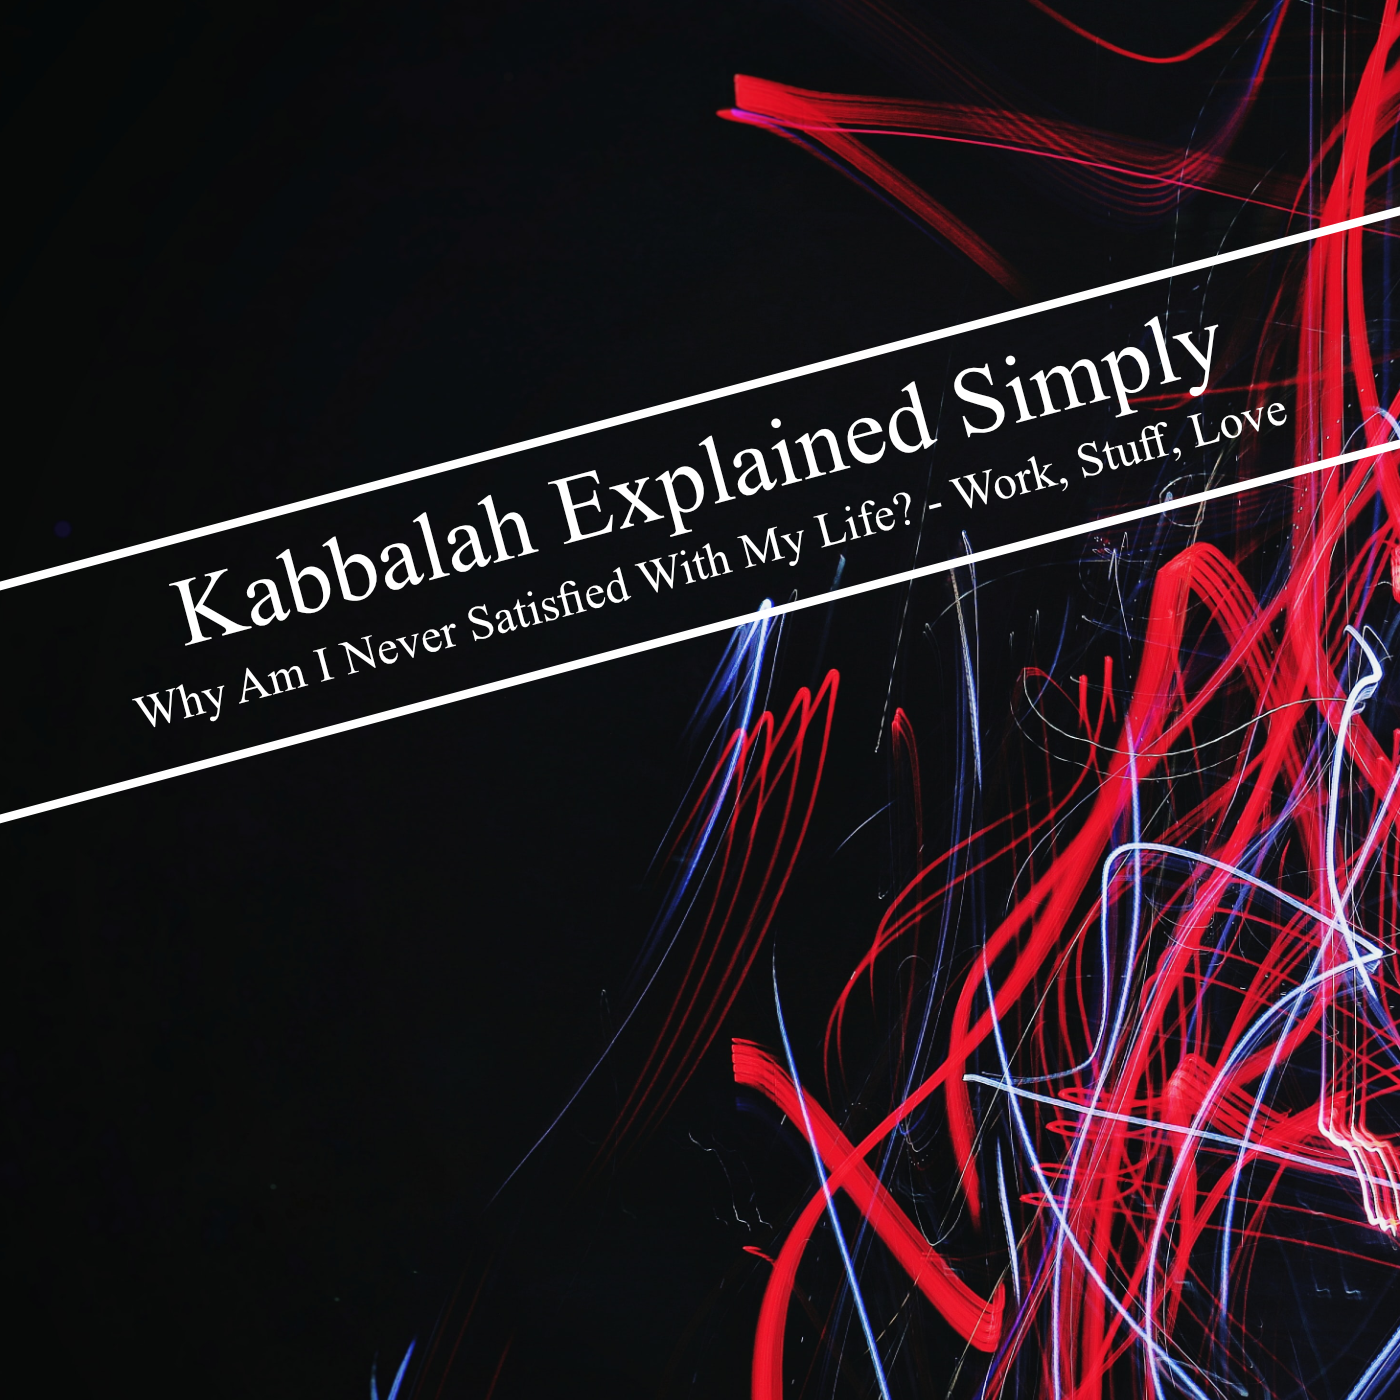 Kabbalah Explained Simply - Why Am I Never Satisfied With My Life? - Work, Stuff, Love